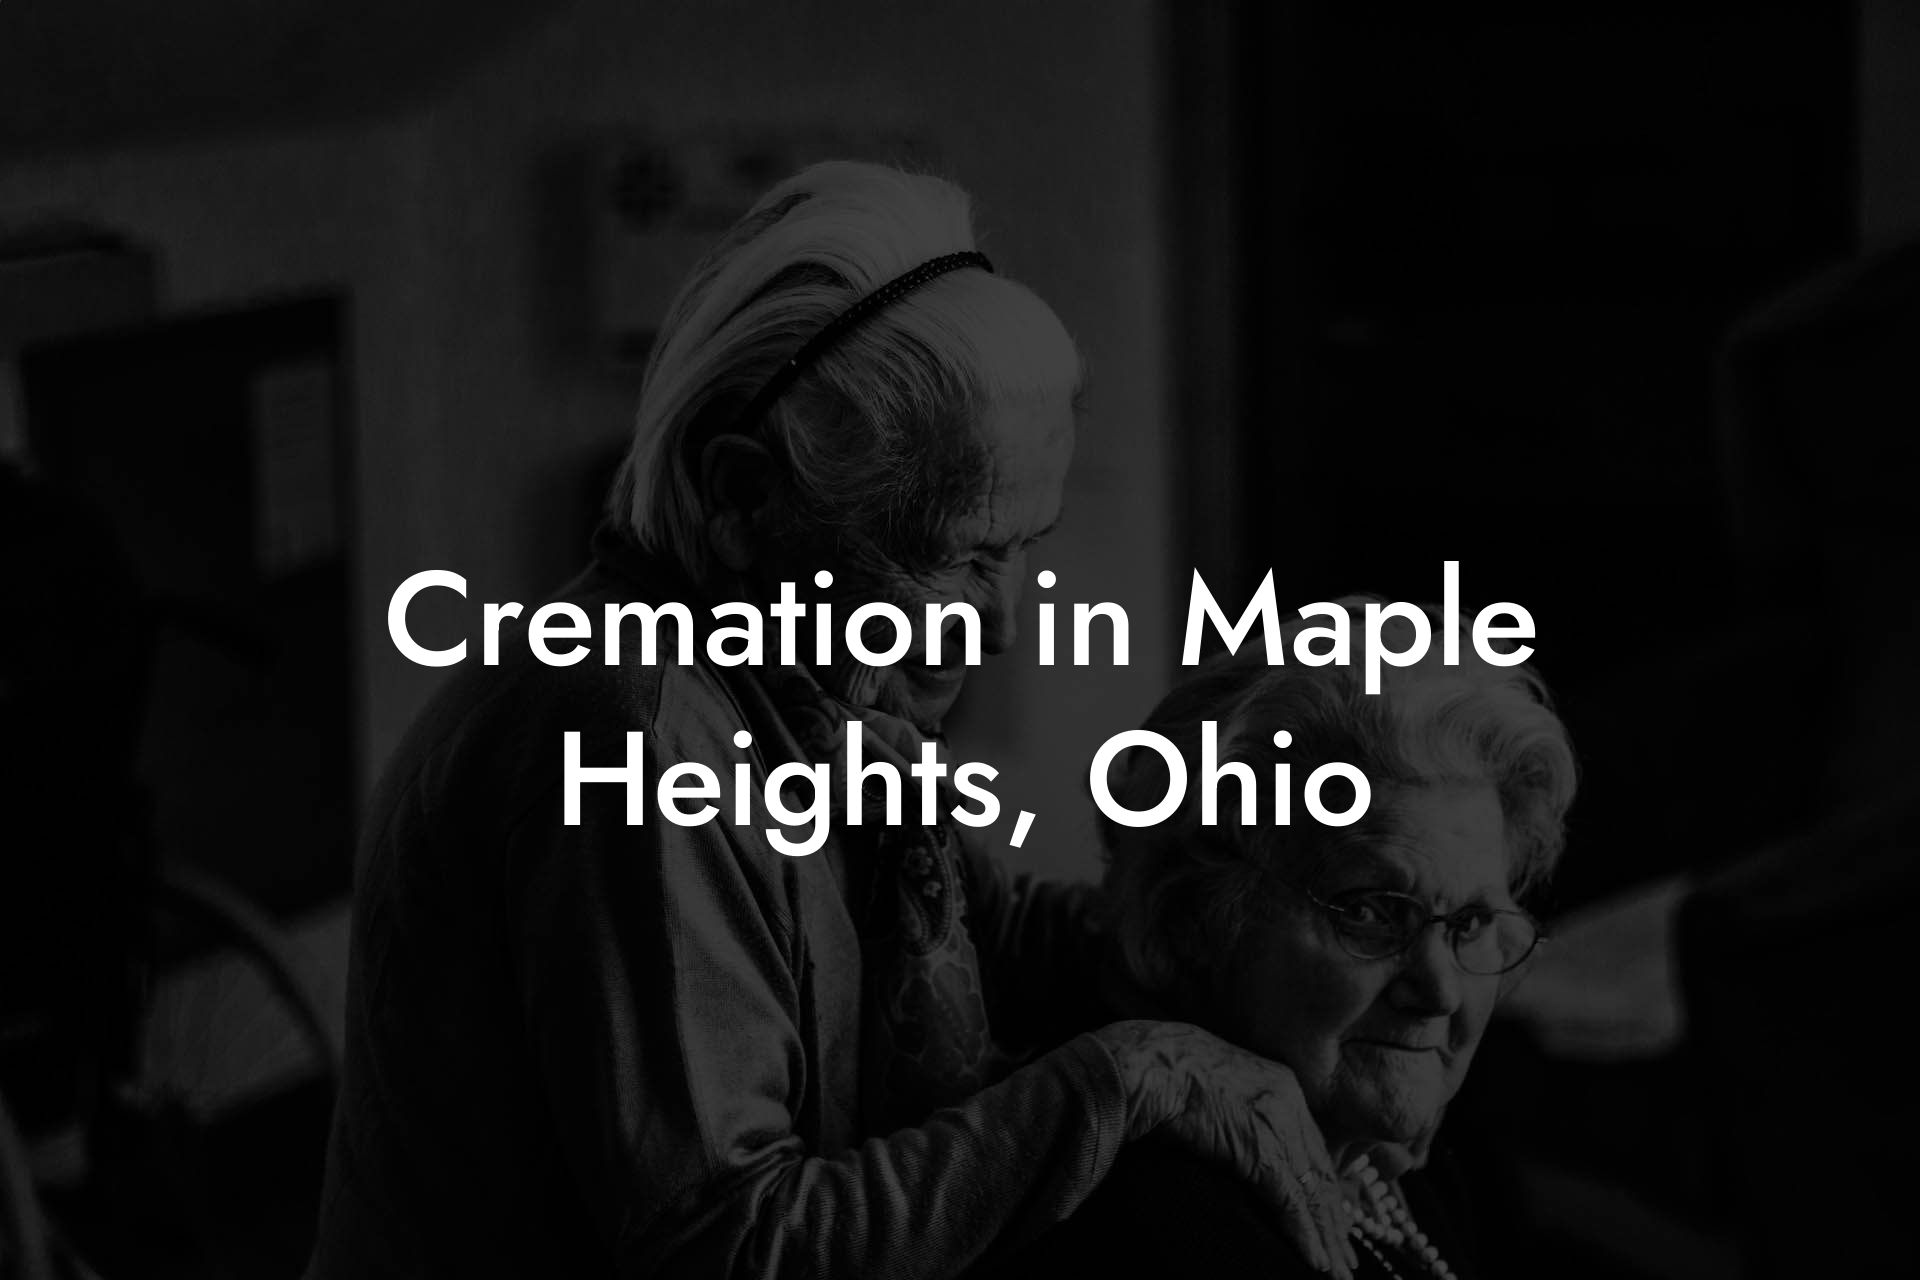 Cremation in Maple Heights, Ohio